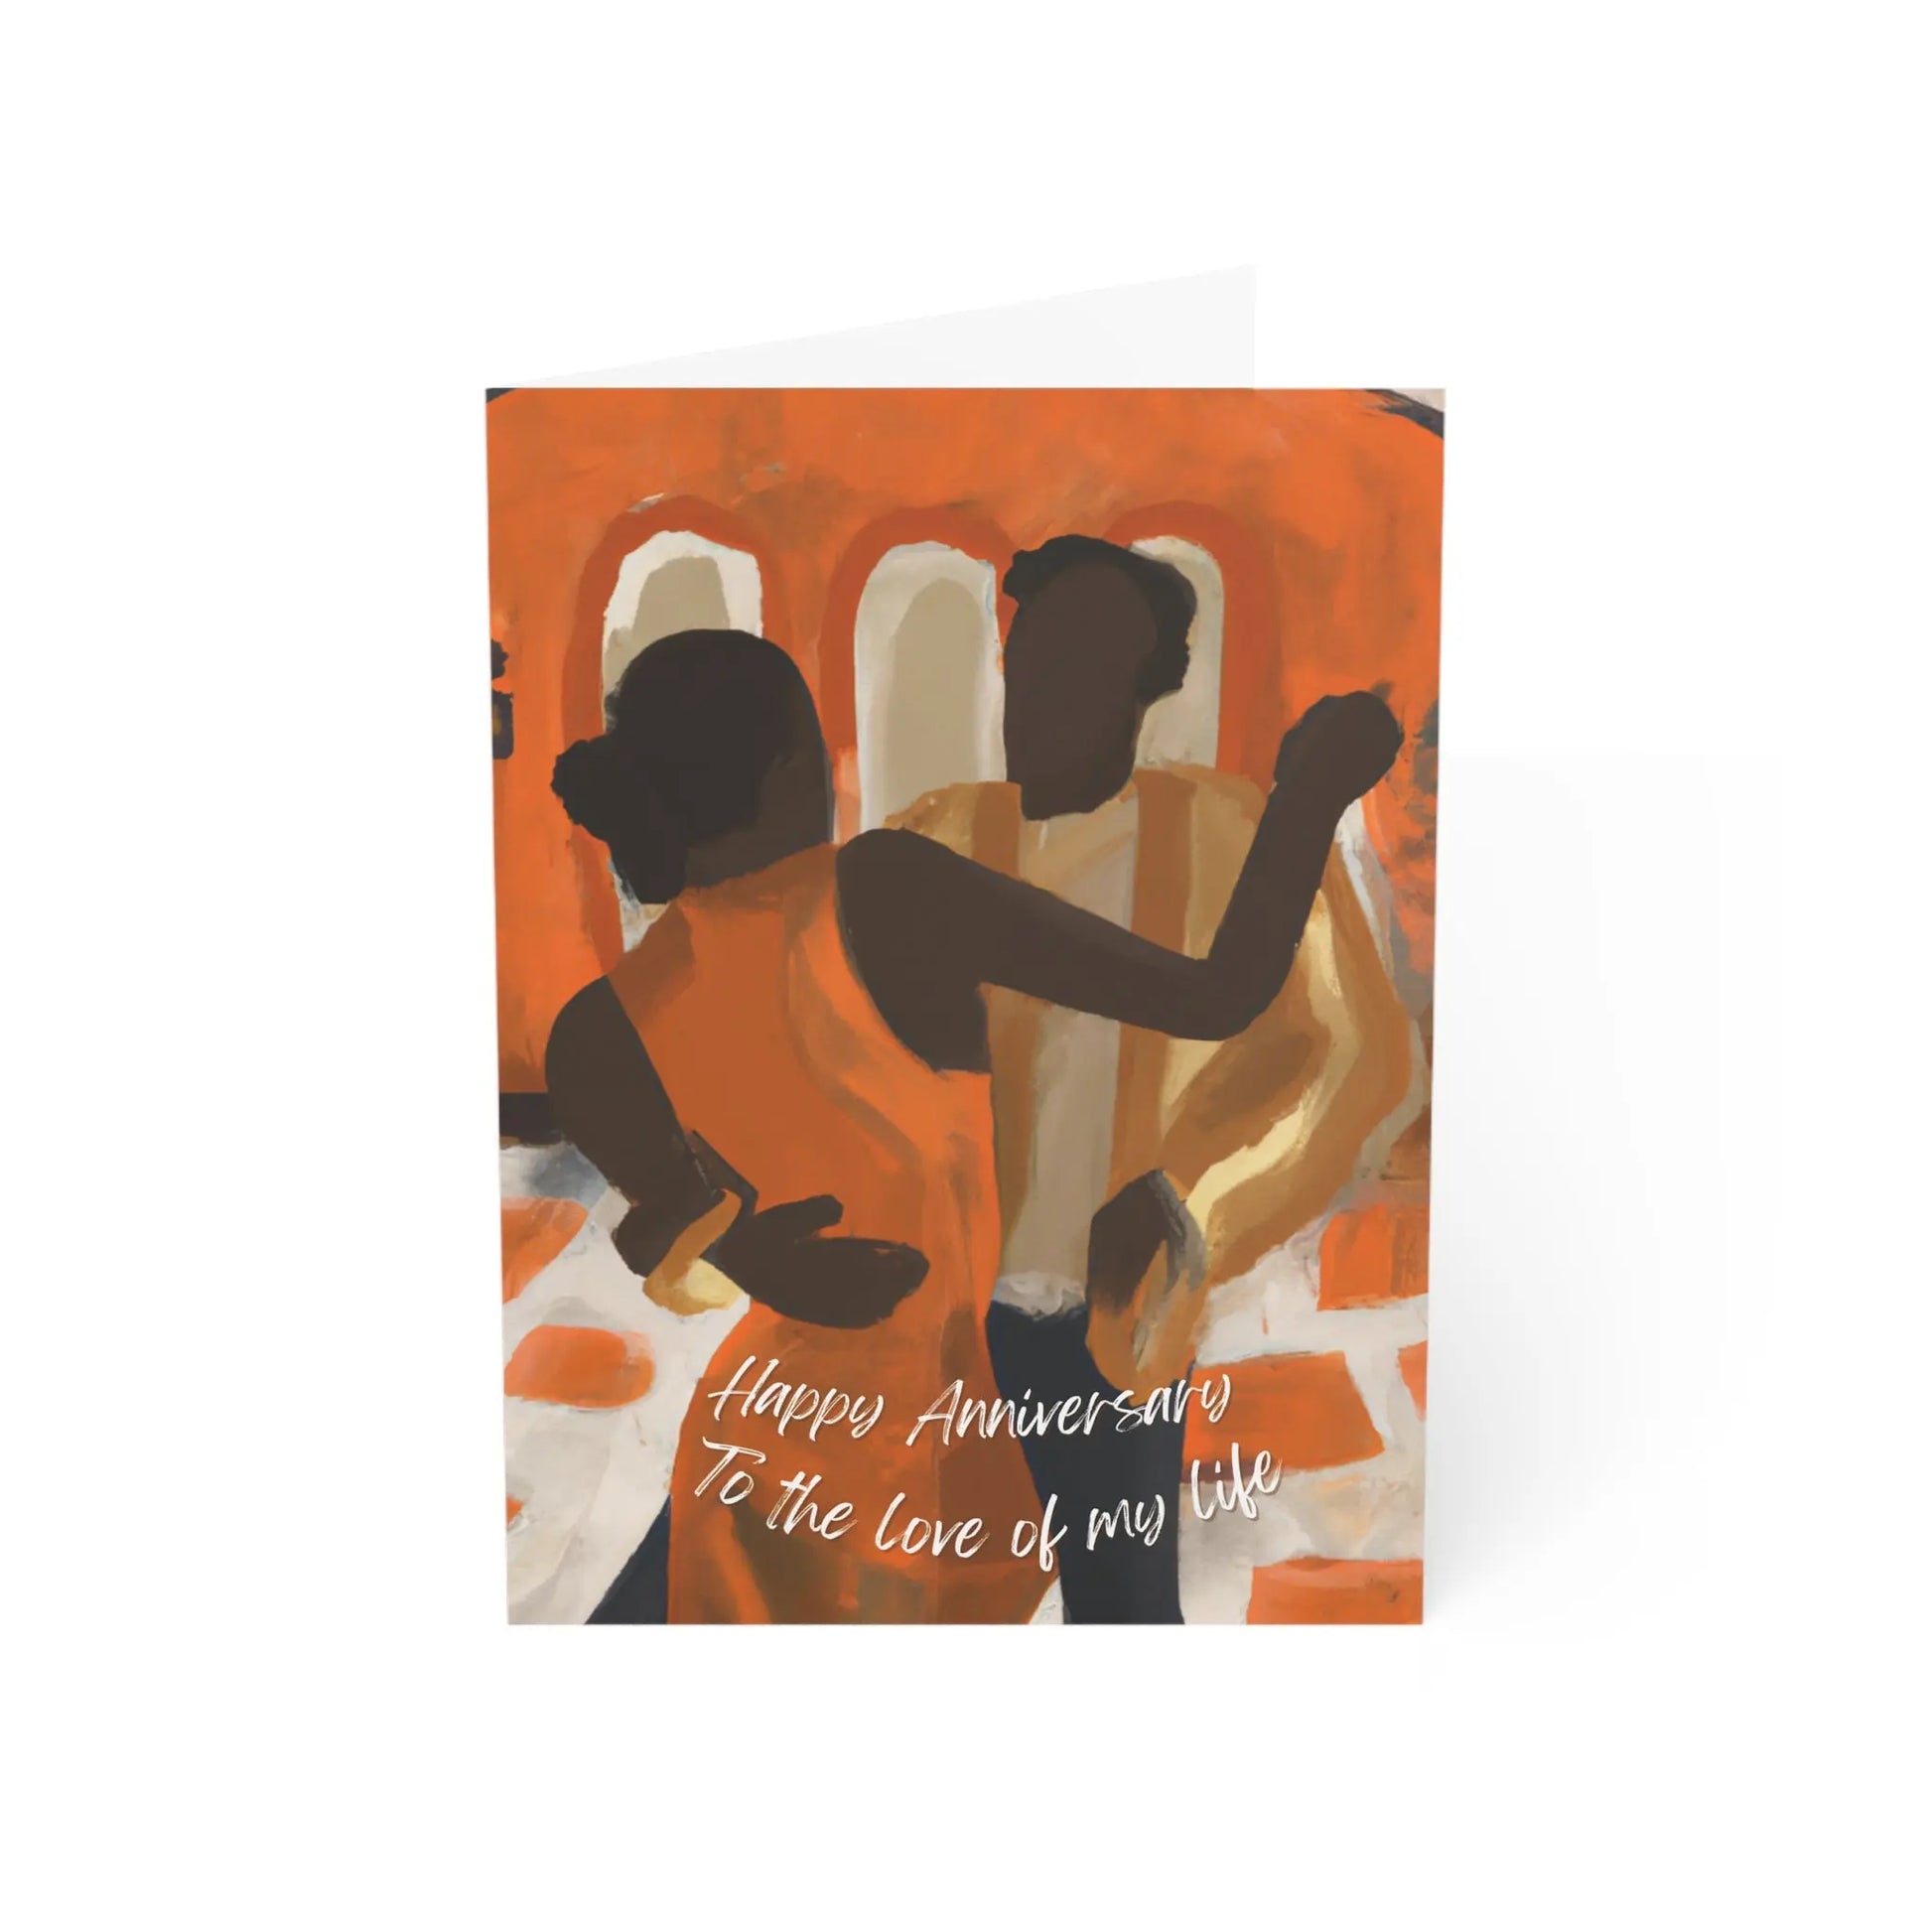 Black Love Anniversary Cards | Anniversary Cards for Him | Anniversary Cards for Her | Happy Anniversary Cards Greeting Cards (1, 10, 30, and 50pcs) 